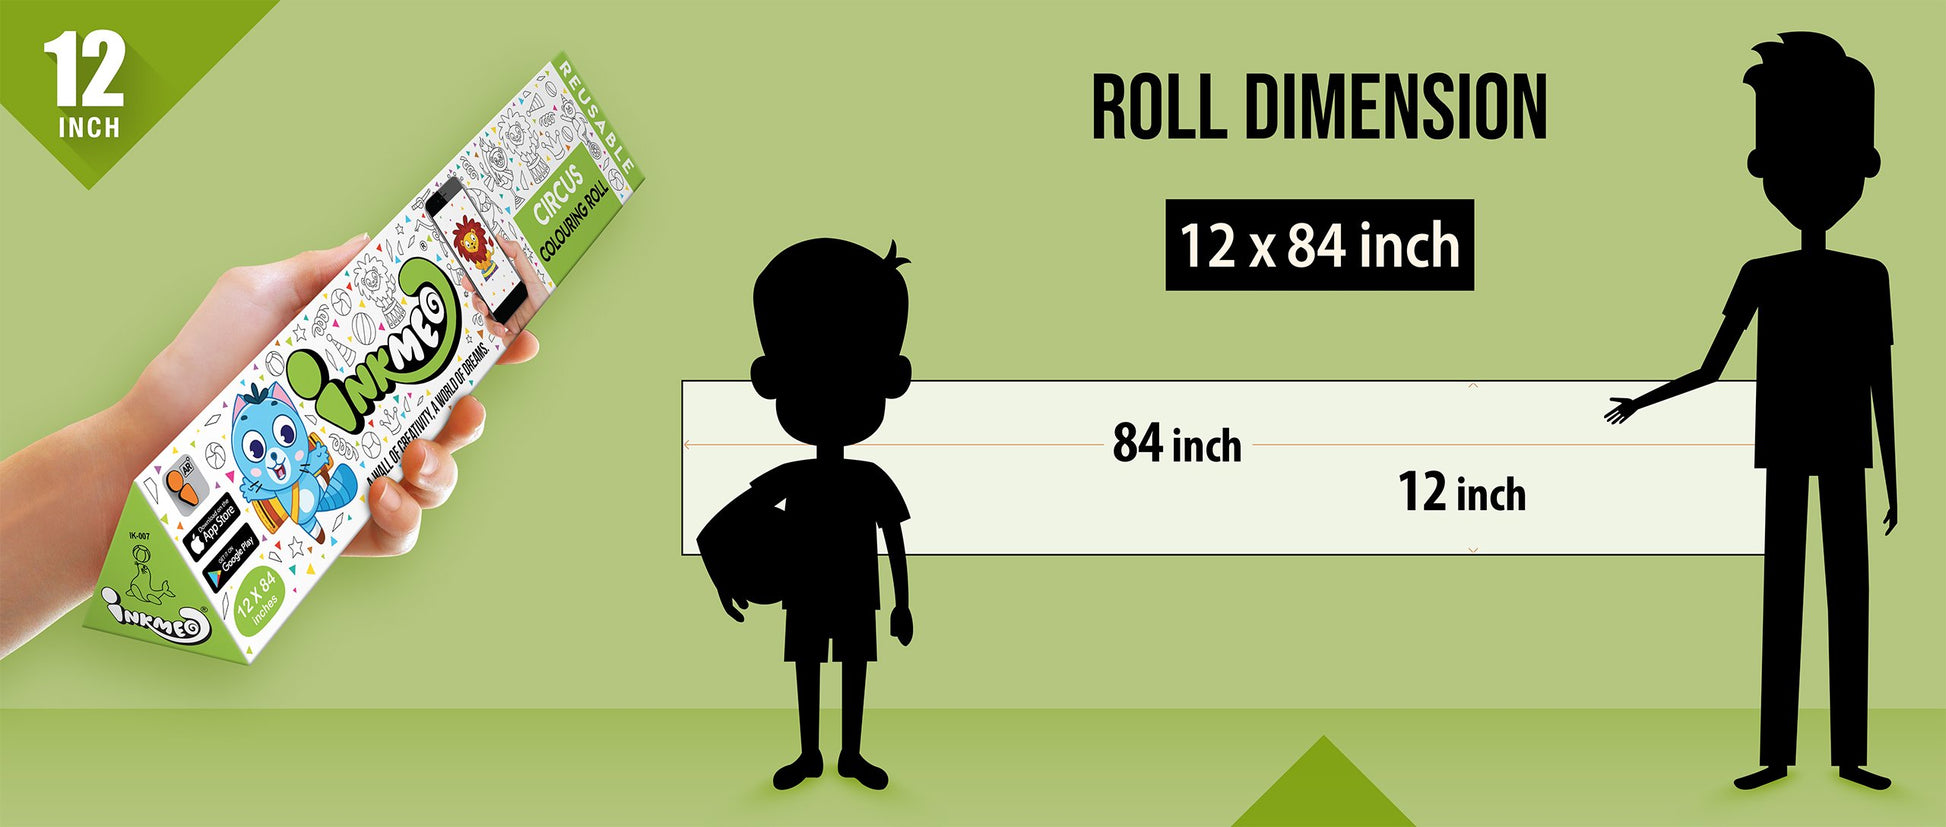 The image shows a green background with a ruler indicating child and adult height on an 12*84 inch paper roll dimension.